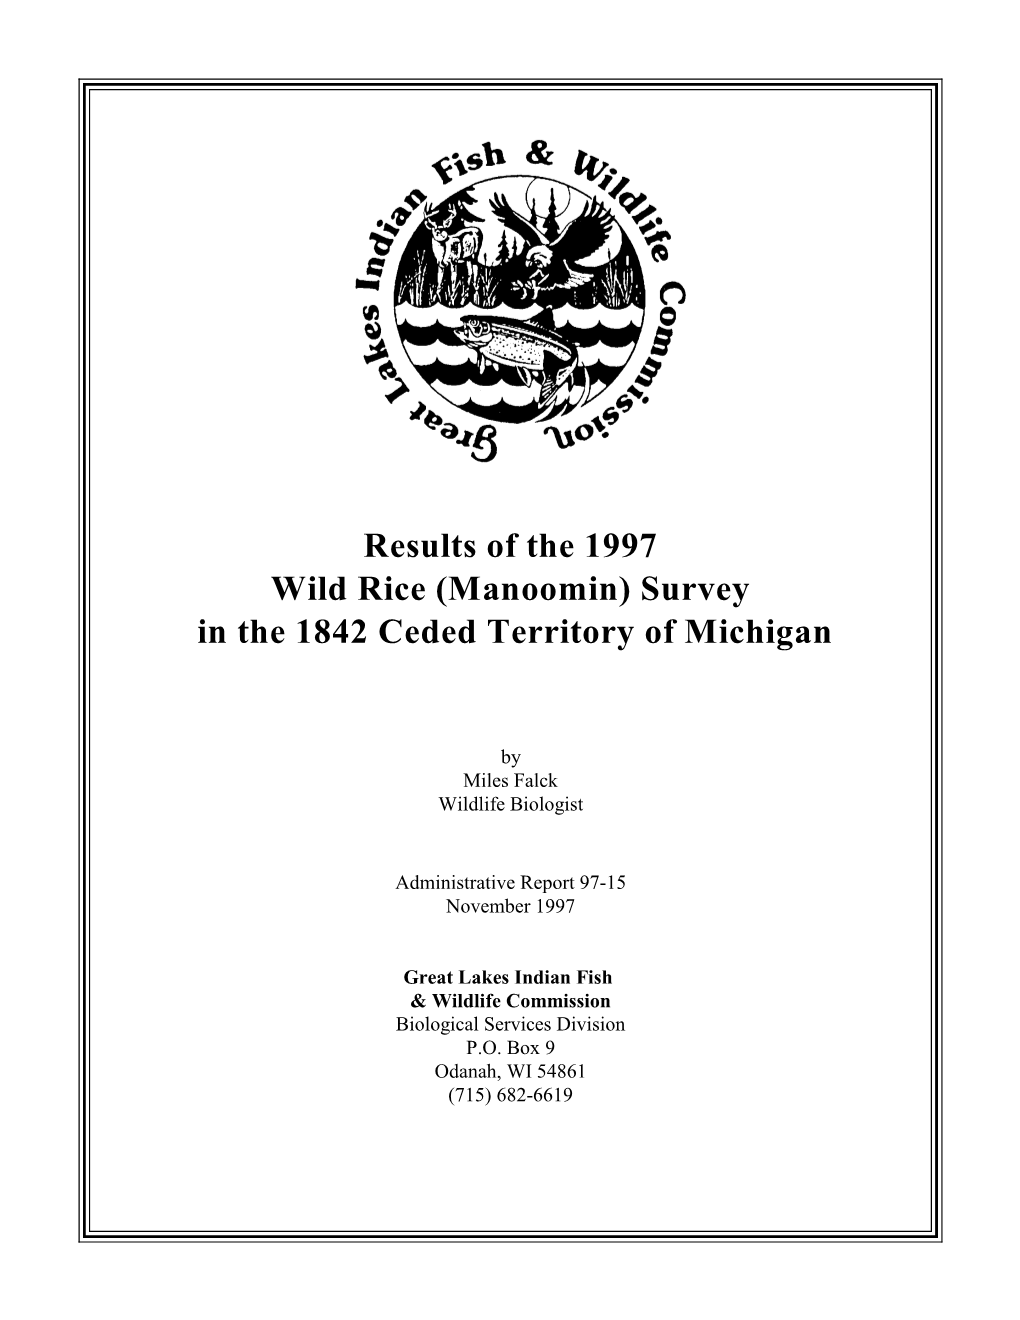 Results of the 1997 Wild Rice (Manoomin) Survey in the 1842 Ceded Territory of Michigan